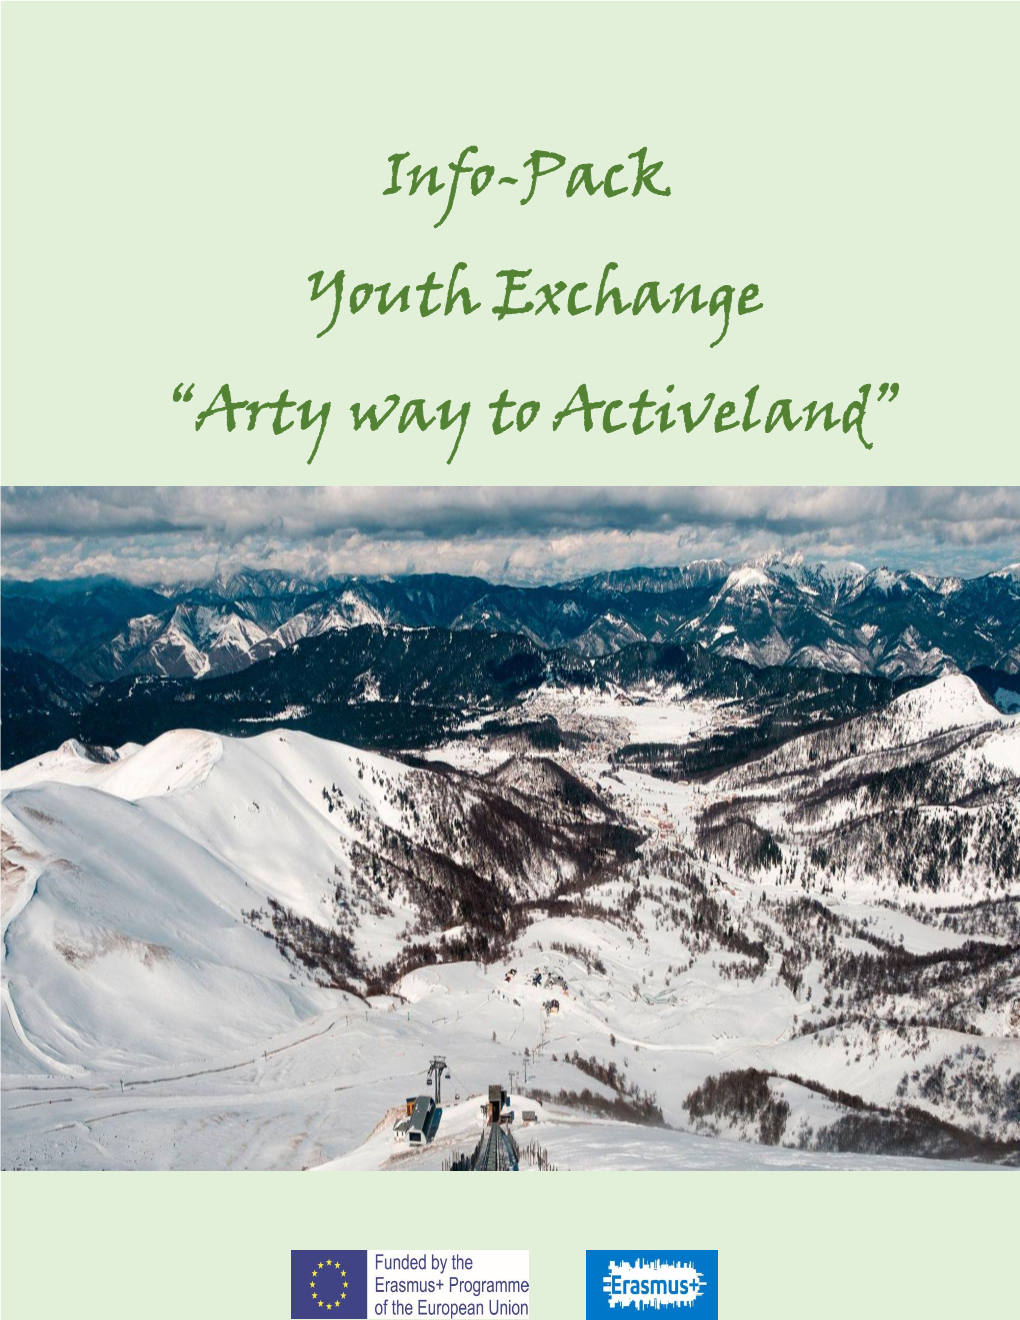 Info-Pack Youth Exchange “Arty Way to Activeland”